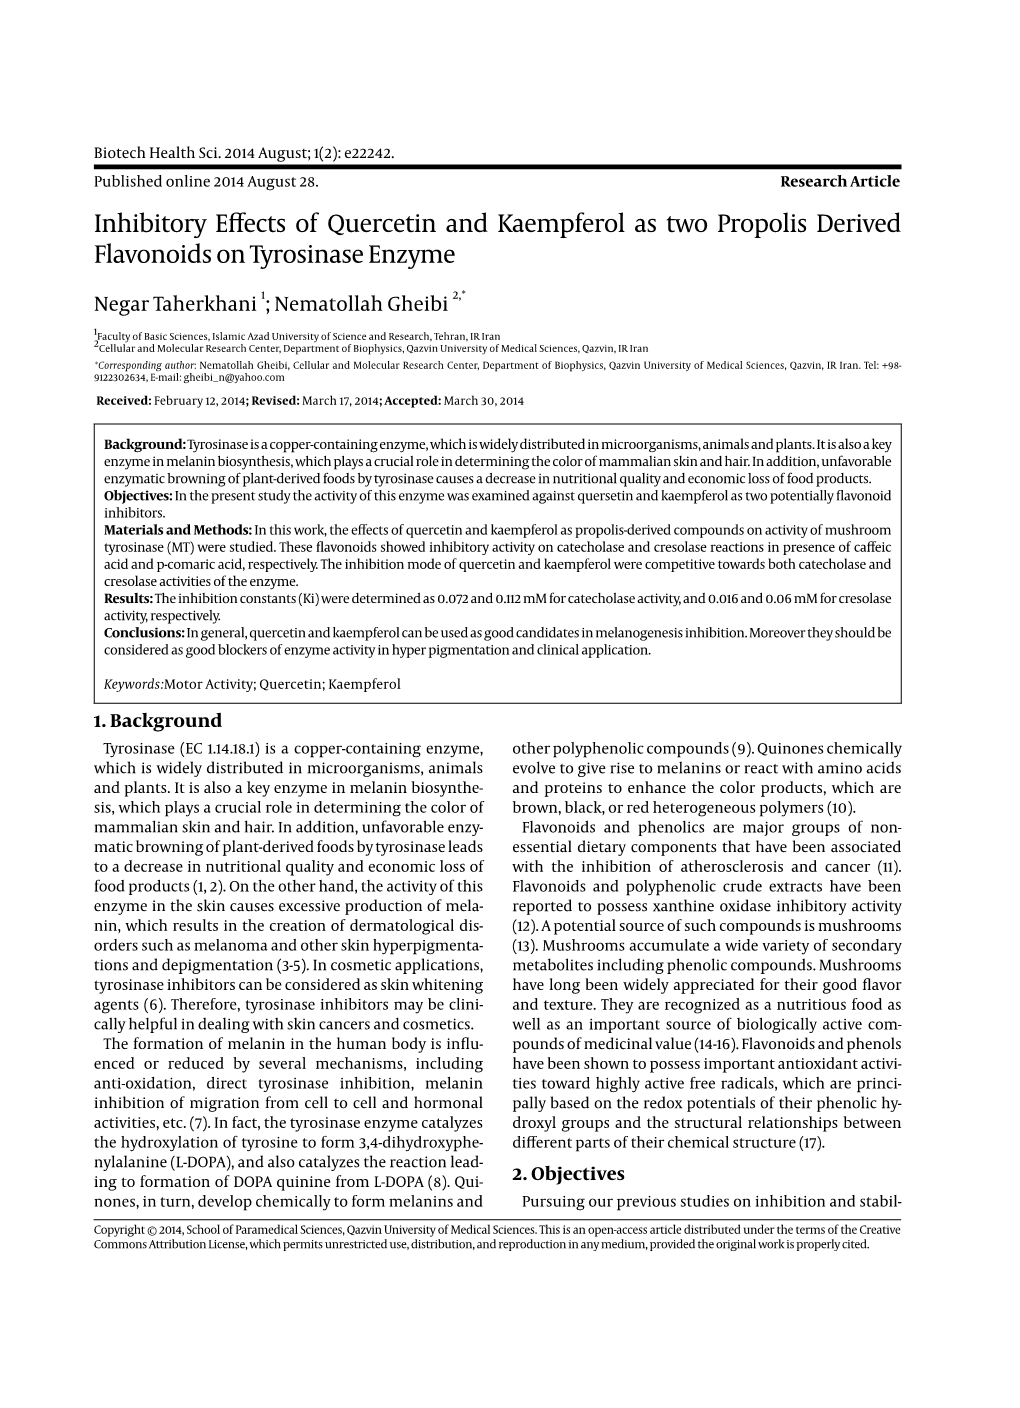 Inhibitory Effects of Quercetin and Kaempferol As Two Propolis Derived Flavonoids on Tyrosinase Enzyme